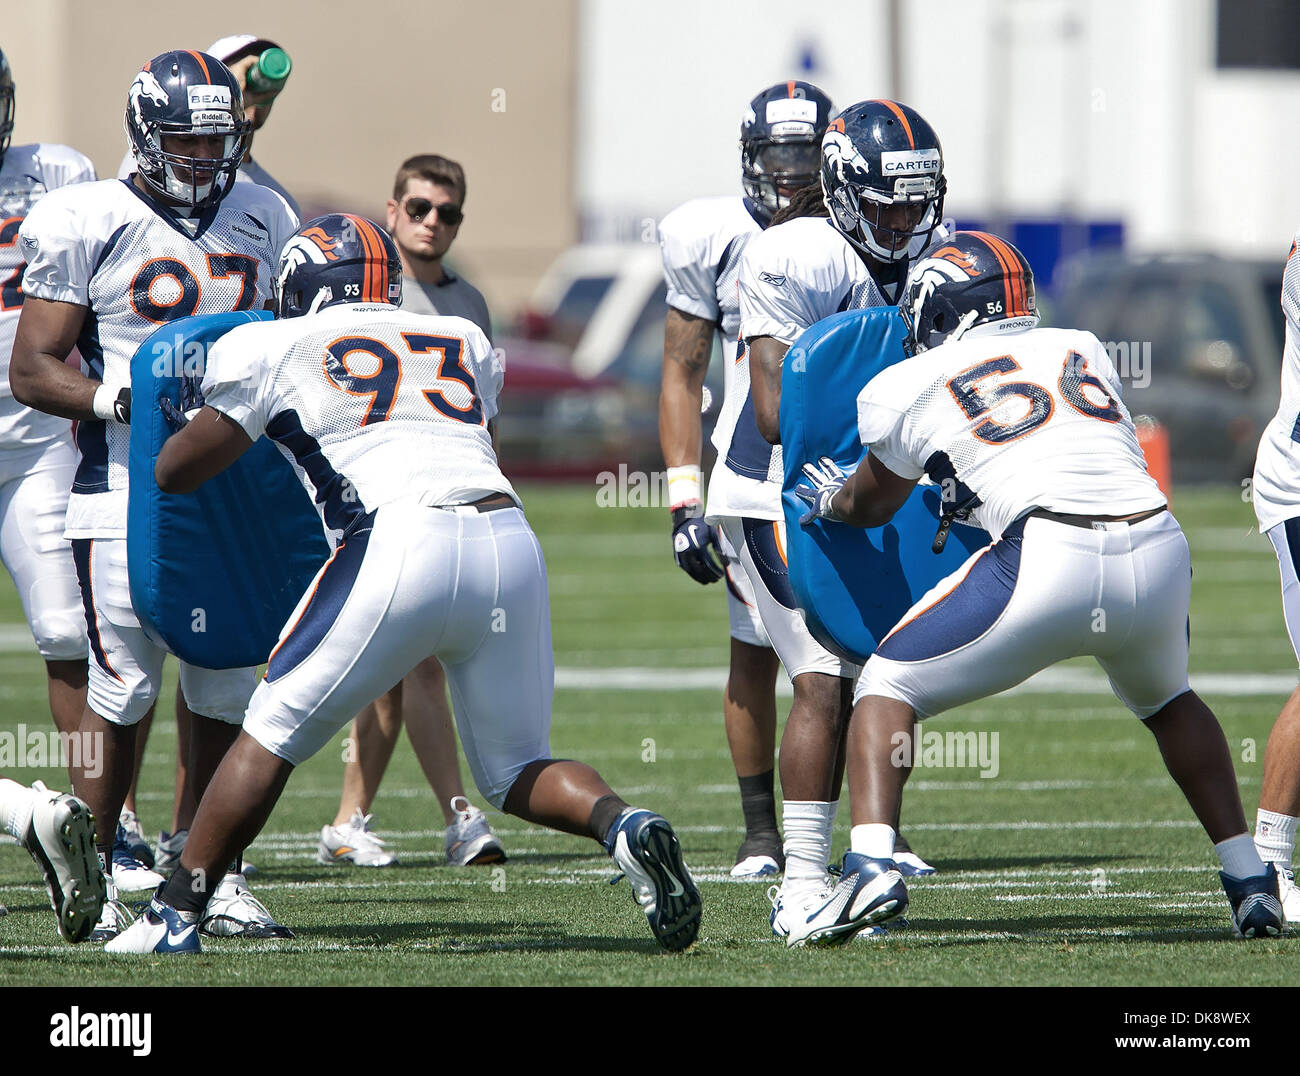 July 31, 2011 - Centennial, Colorado, U.S. - DT JEREMY JARMON, left, and DE ROBERT AYERS, RIGHT, practice drills during the Denver Broncos Training Camp Sunday afternoon at Dove Valley in Centennial, Colorado. (Credit Image: © Hector Acevedo/ZUMAPRESS.com) Stock Photo